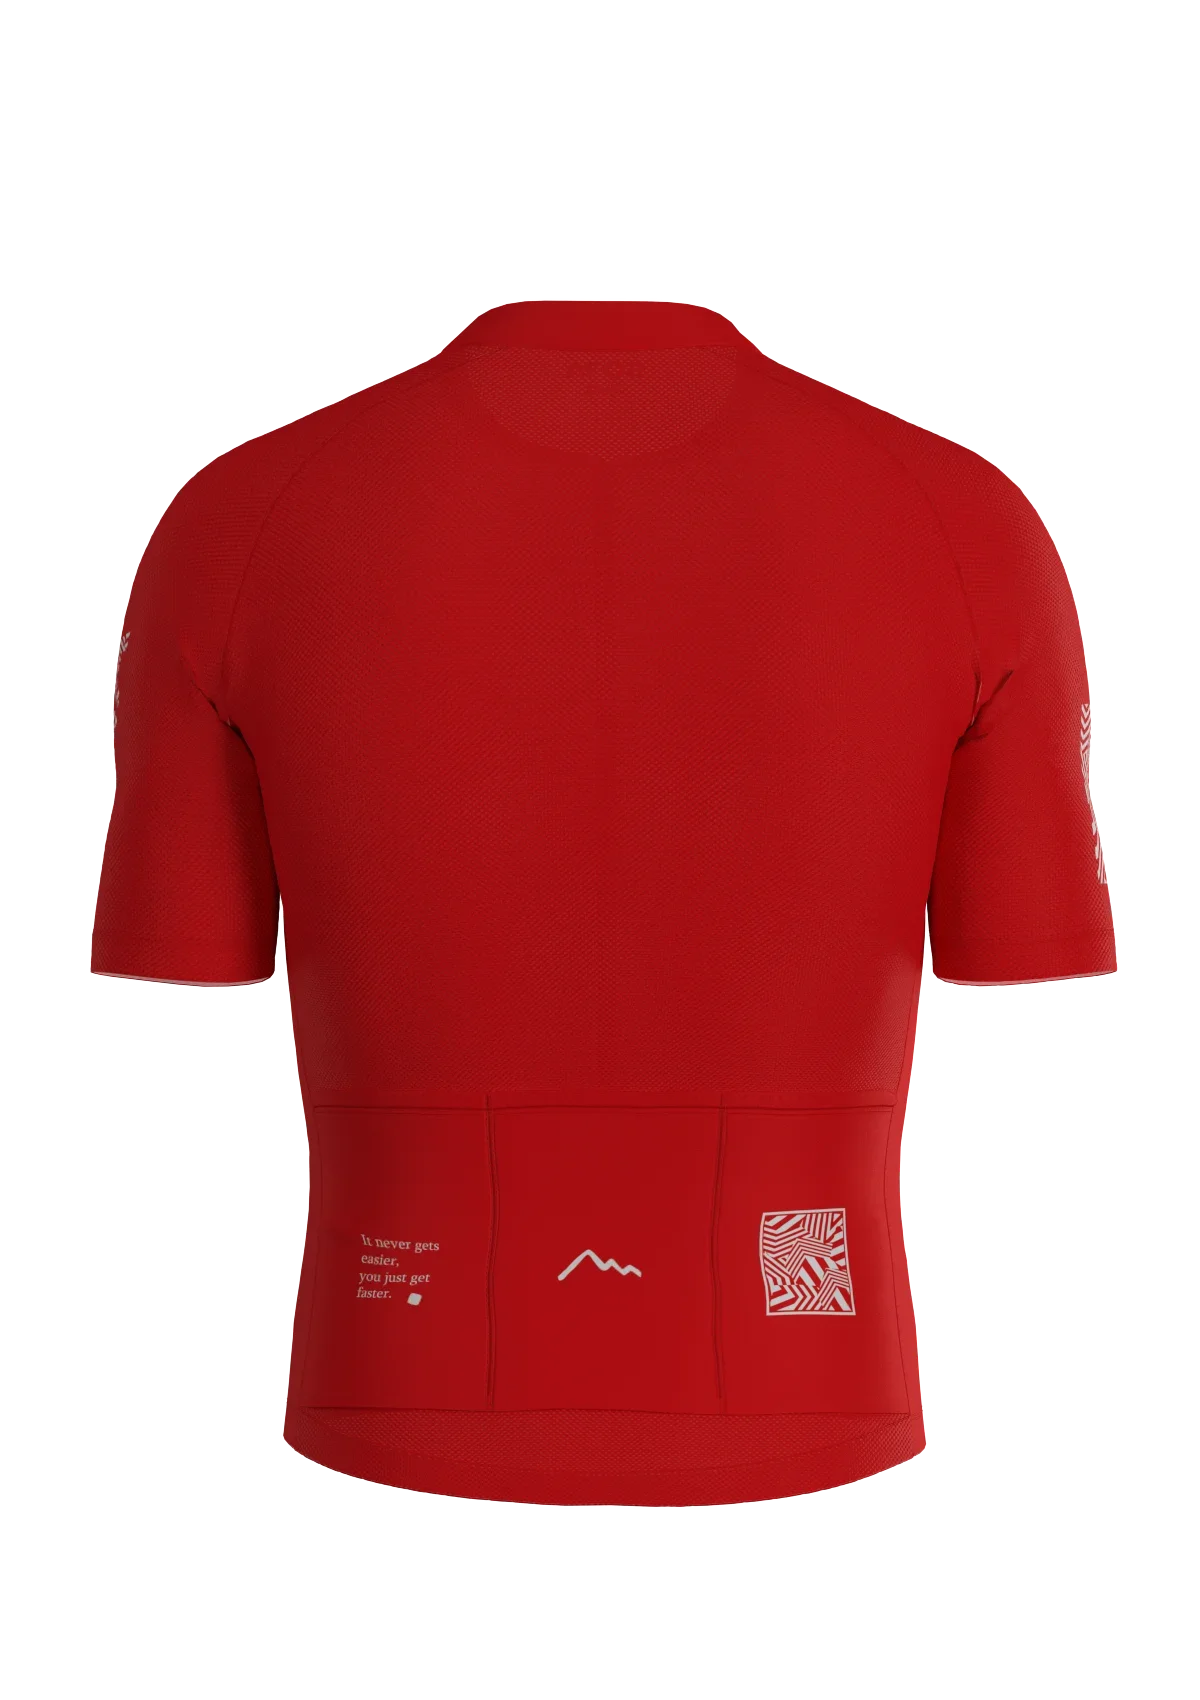 Classic red cycling jersey